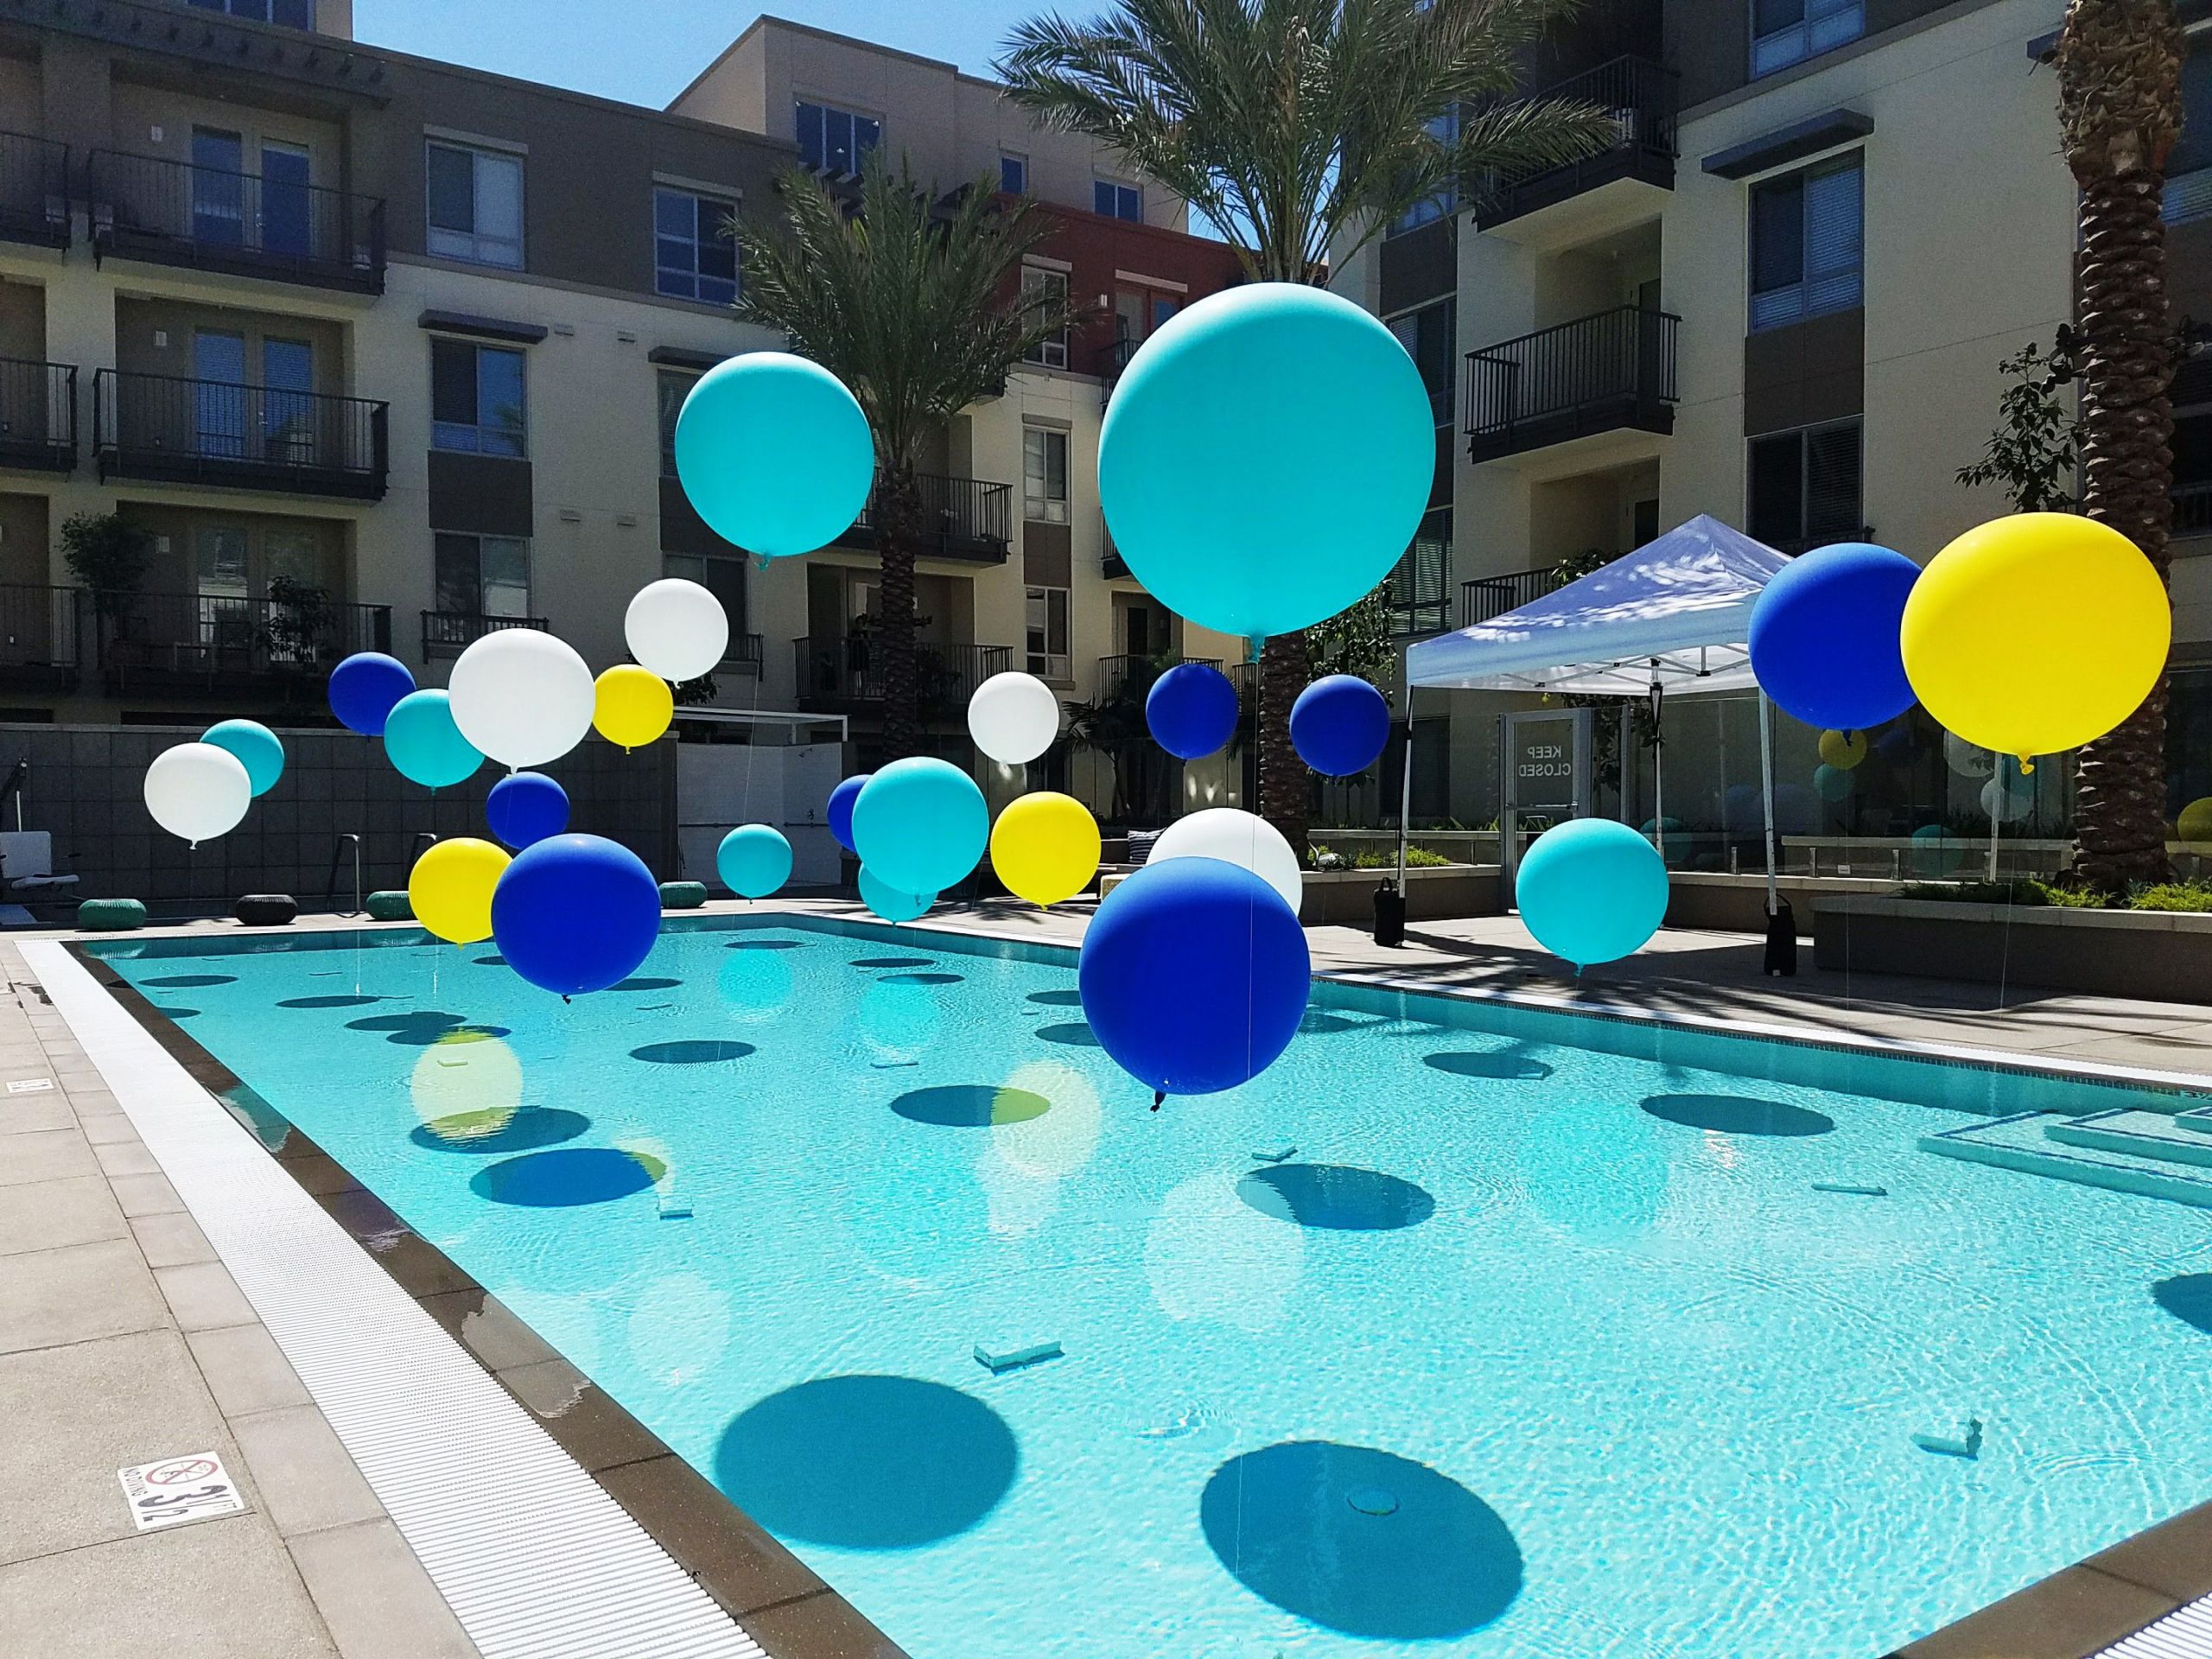 Pool Party Ideas For Boys
 Pool balloons summer party pool party party ideas in